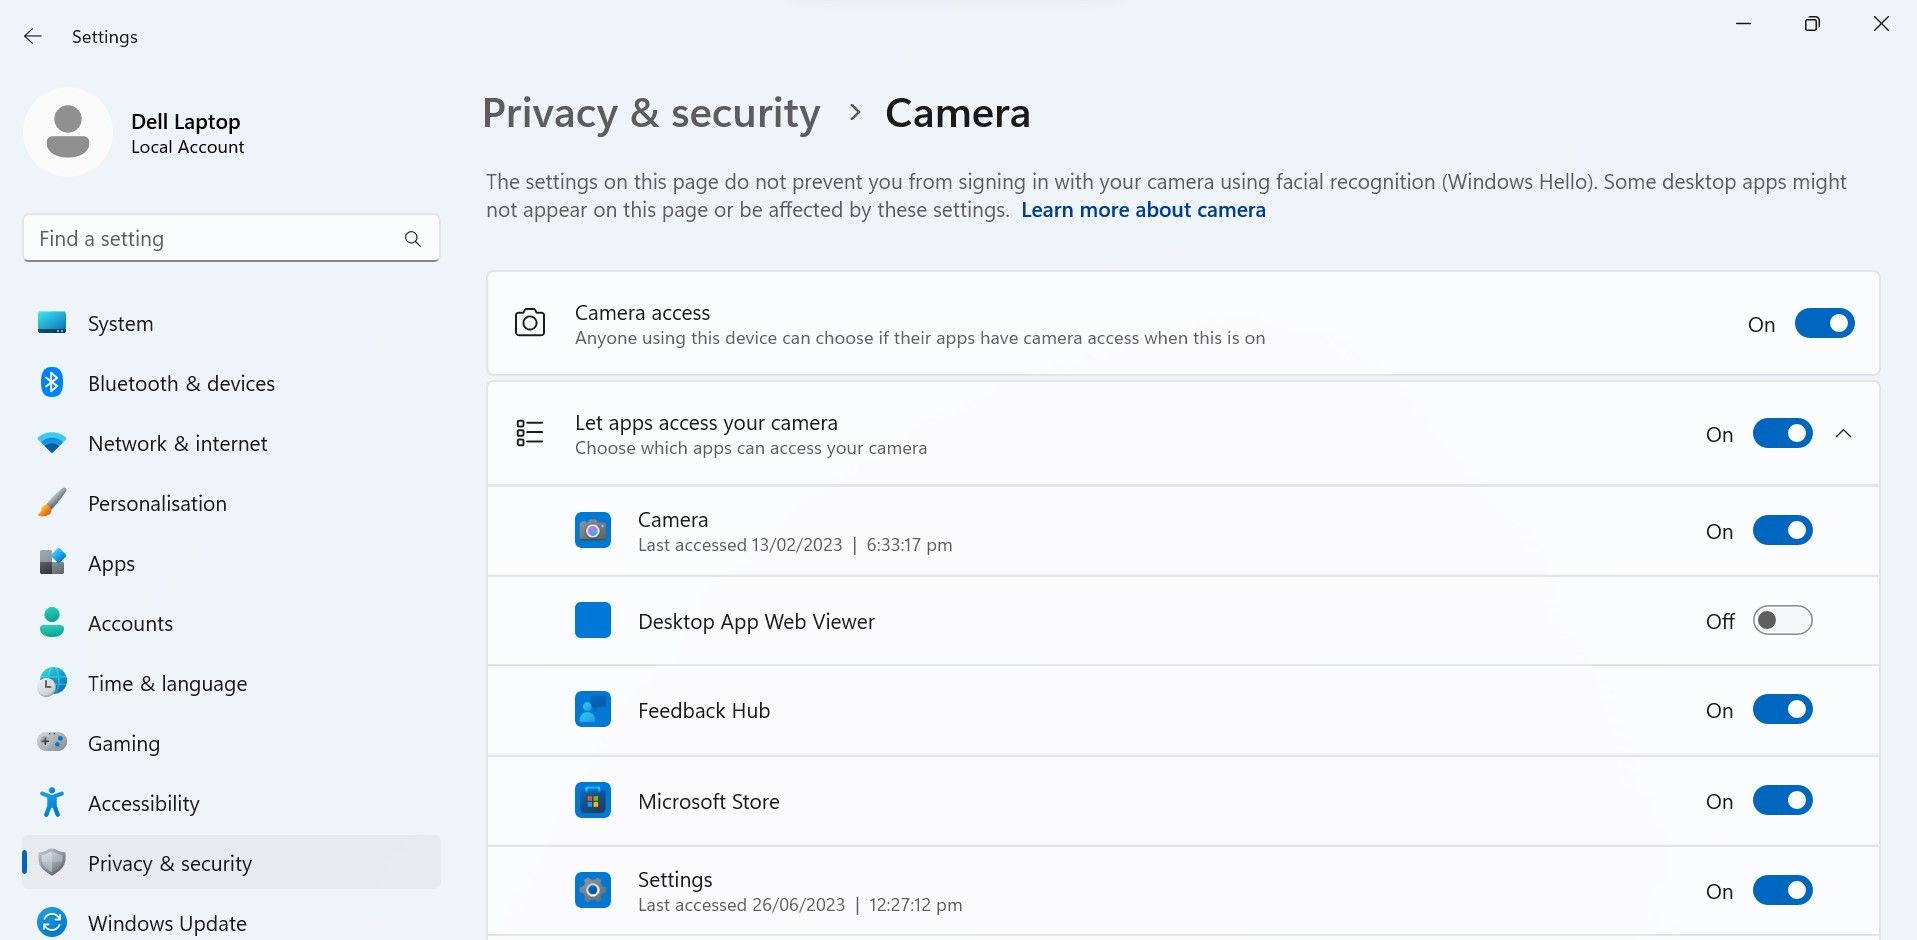 Enabling the cameraa access in the privacy and security tab of the Windows Settings 